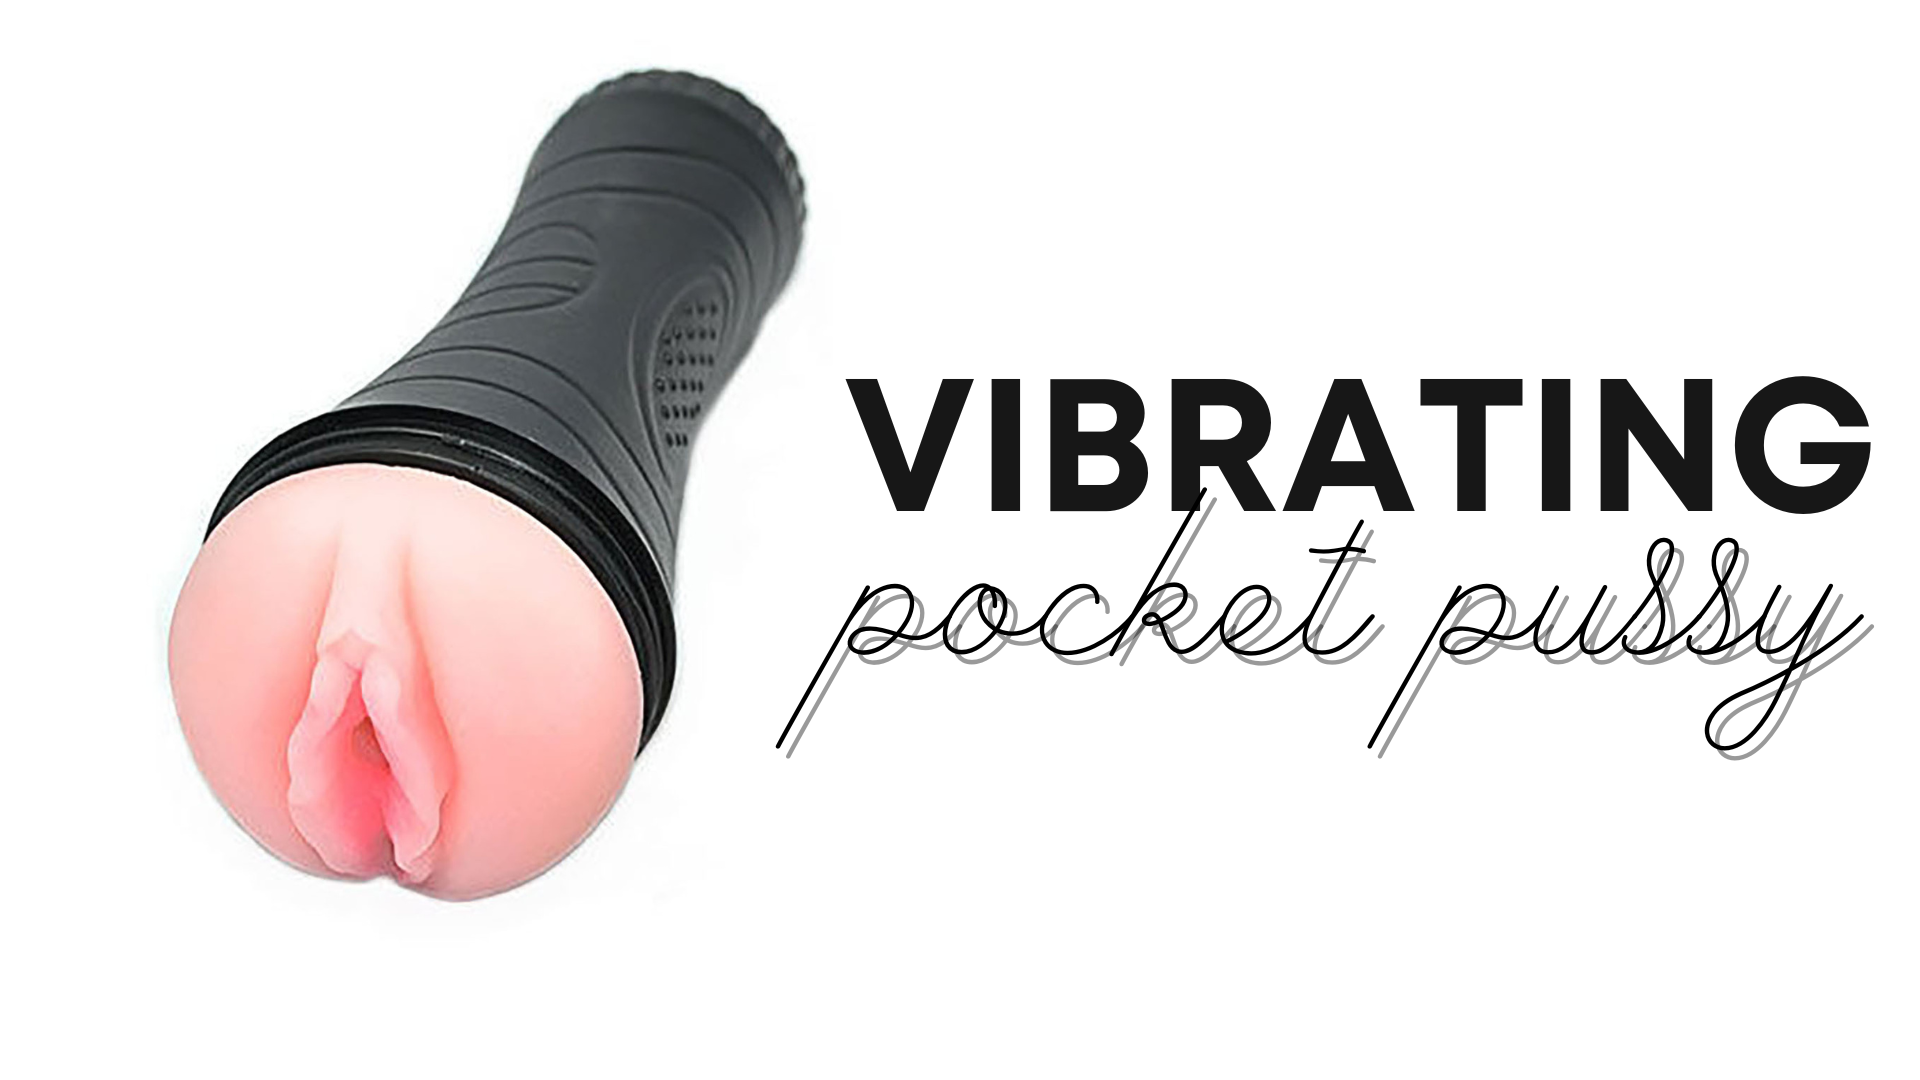 Pocket pussy with a design of vagina with words Vibrating Pocket Pussy on the left